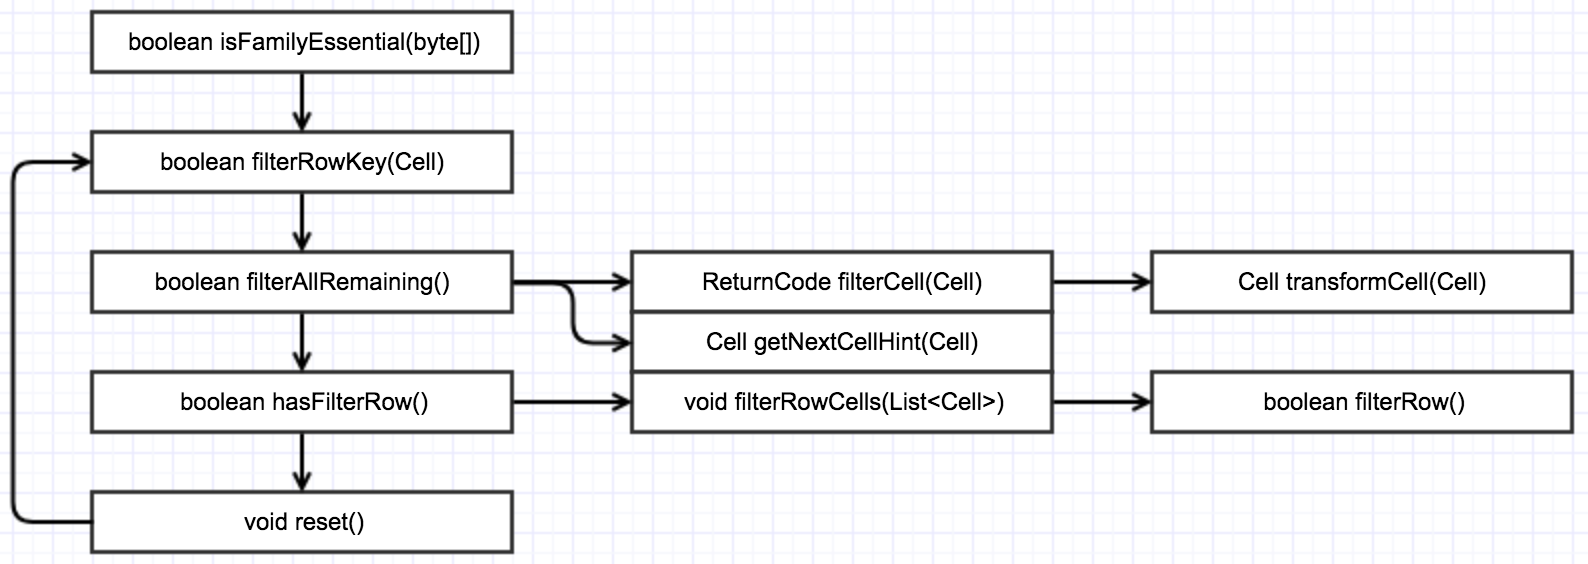 Filter call sequence